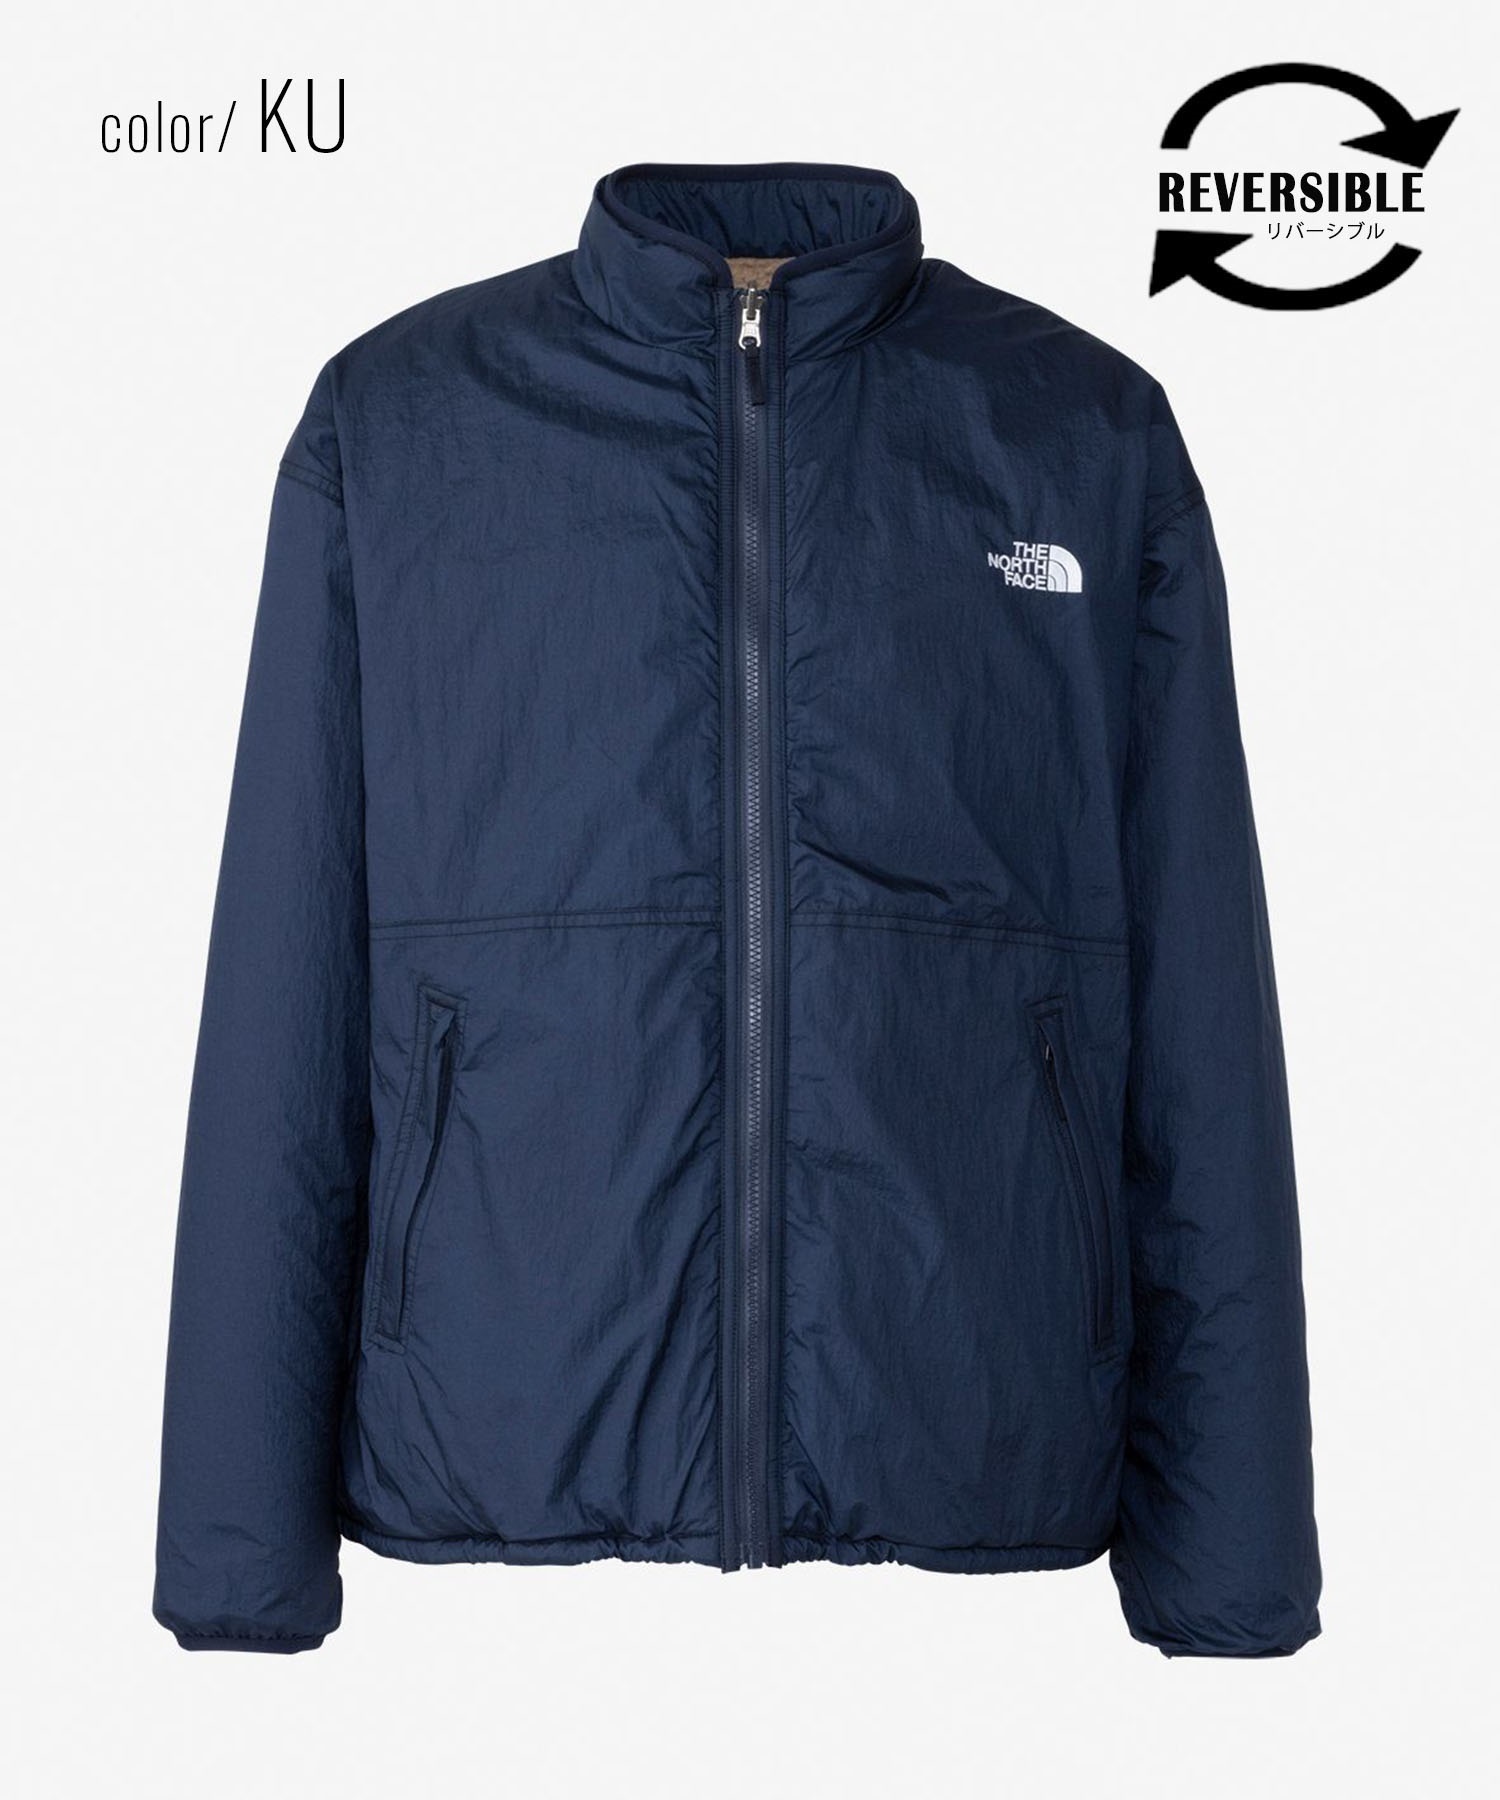 THE NORTH FACE/ザ・ノース・フェイス Reversible Extreme Pile